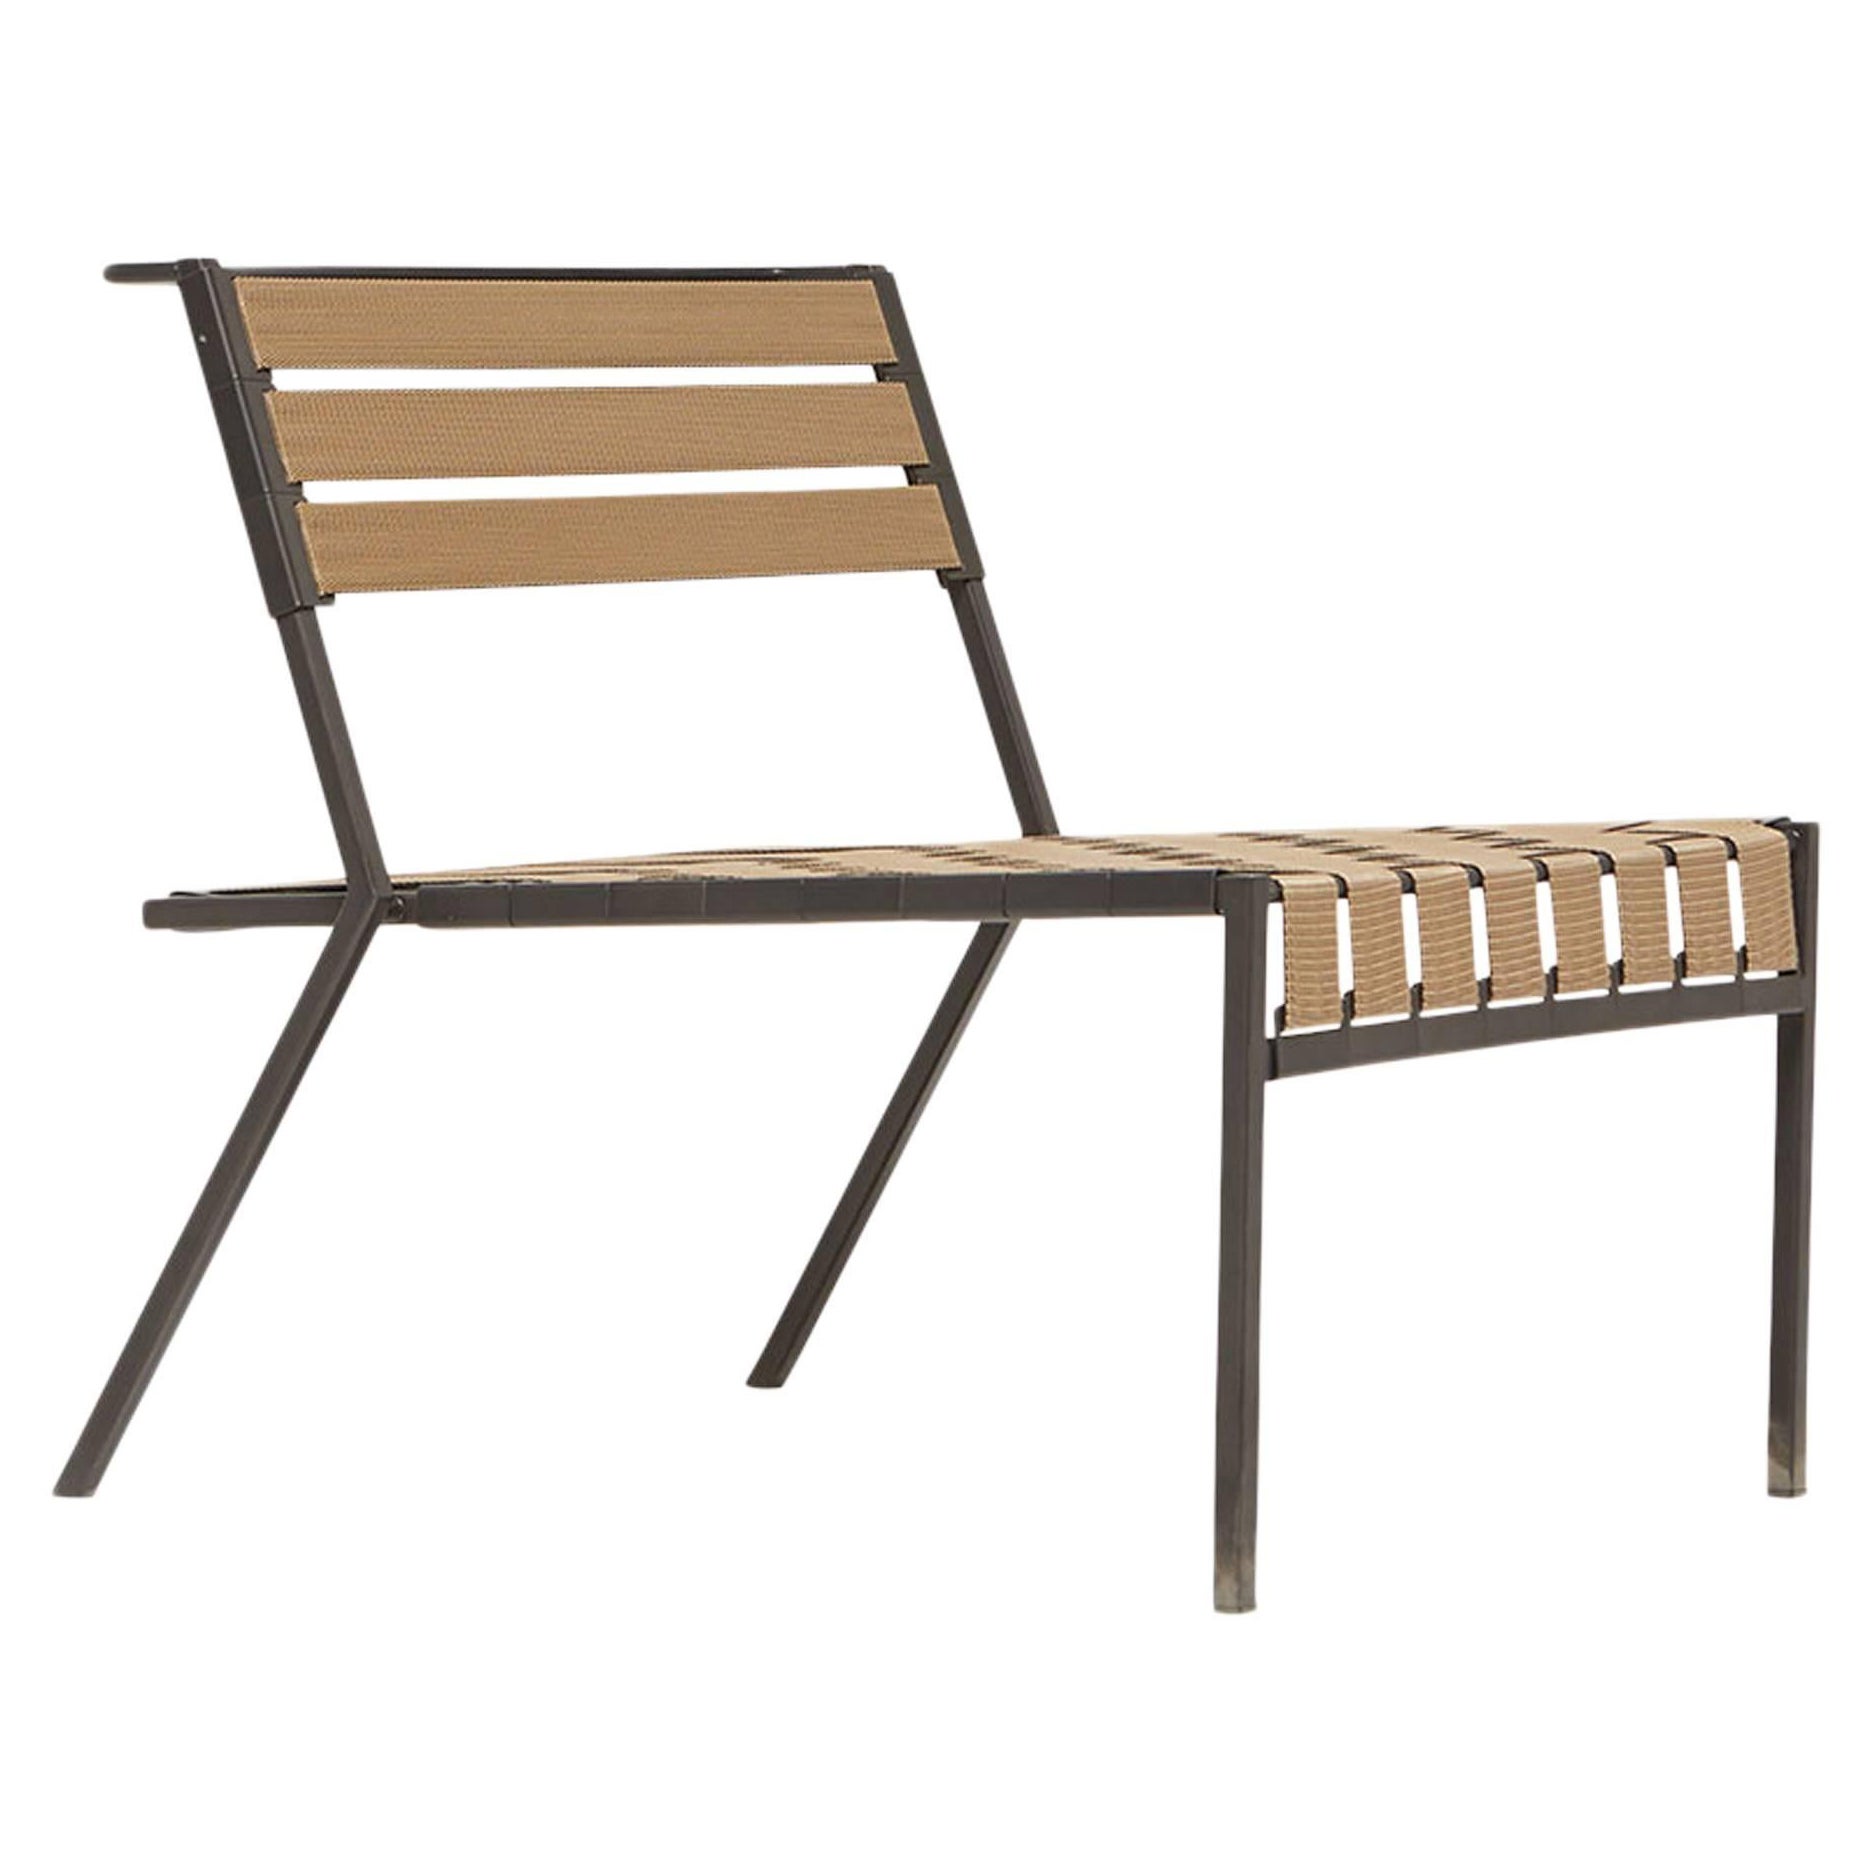 Tan & Charcoal Outdoor Lounge Chair